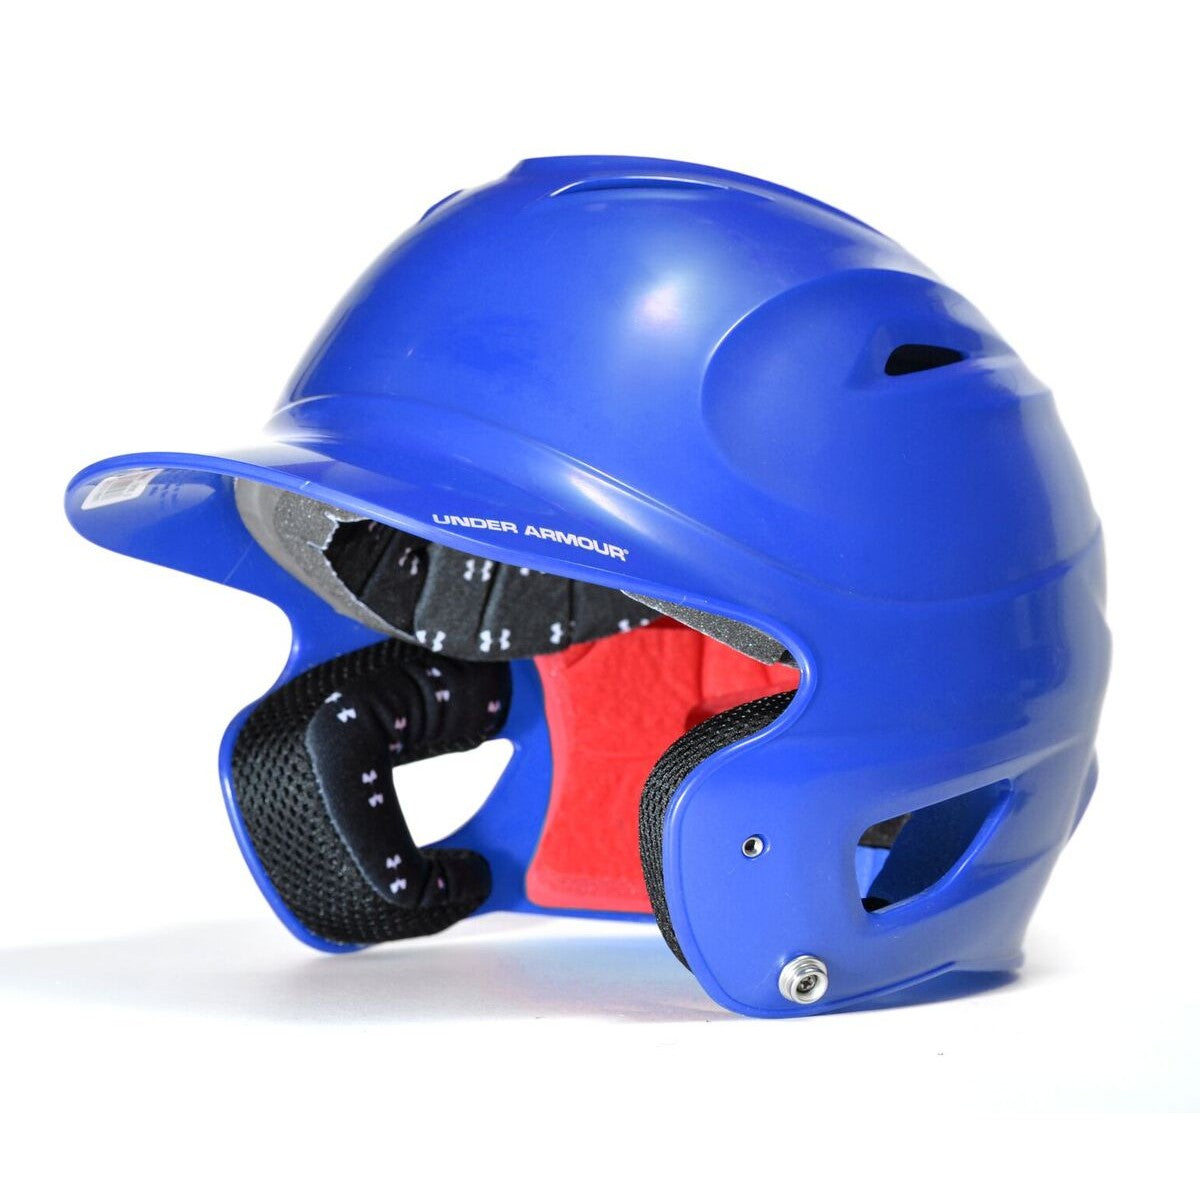 under-armour-fitted-solid-batters-helmet-uabh-200